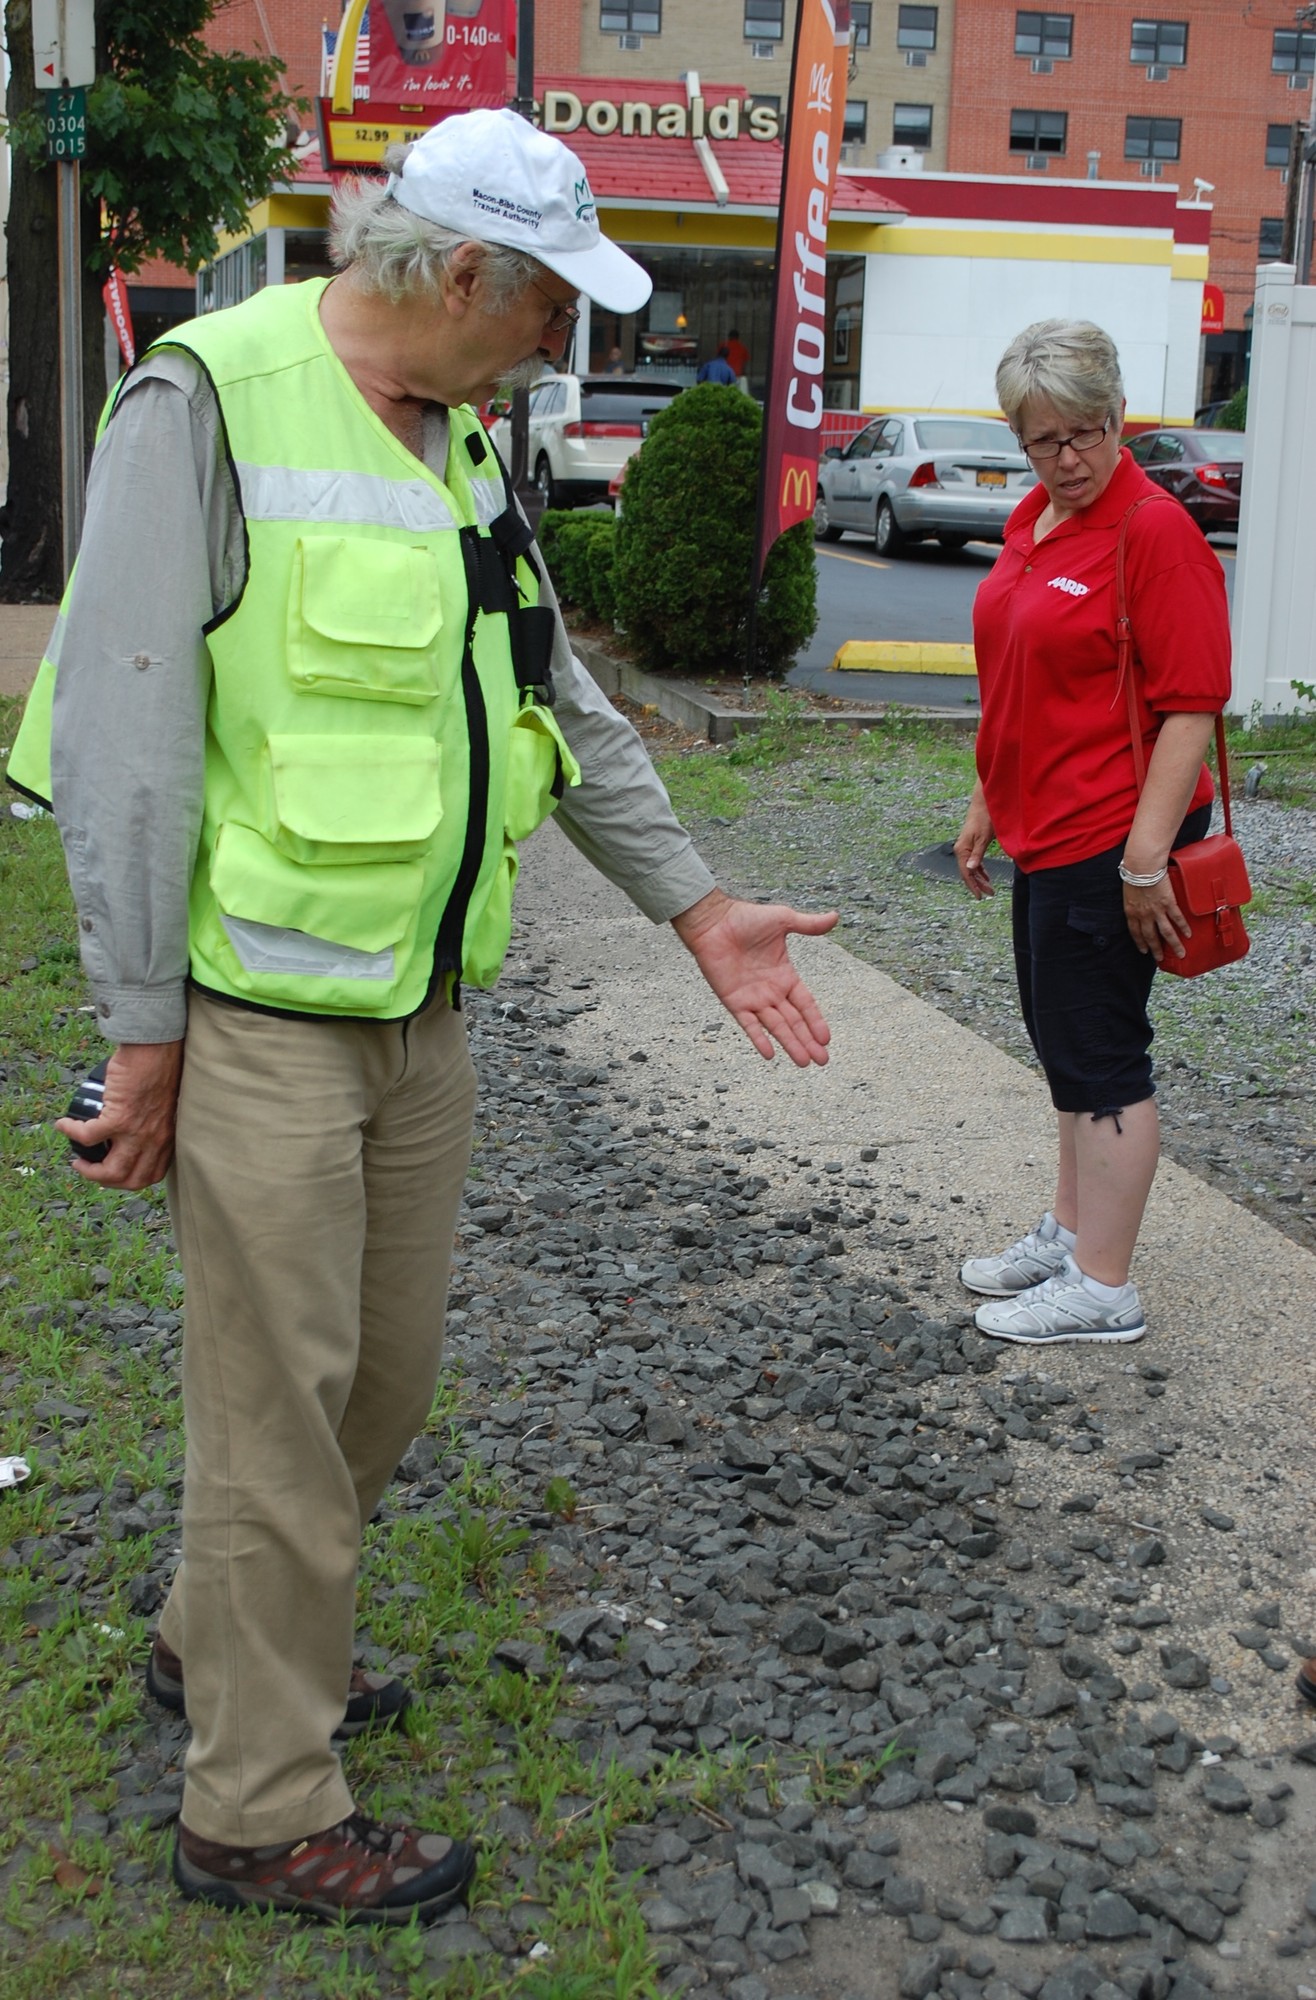 Dan Burden pointed to a patch of rocks covering the sidewalk as an obstacle to pedestrians.